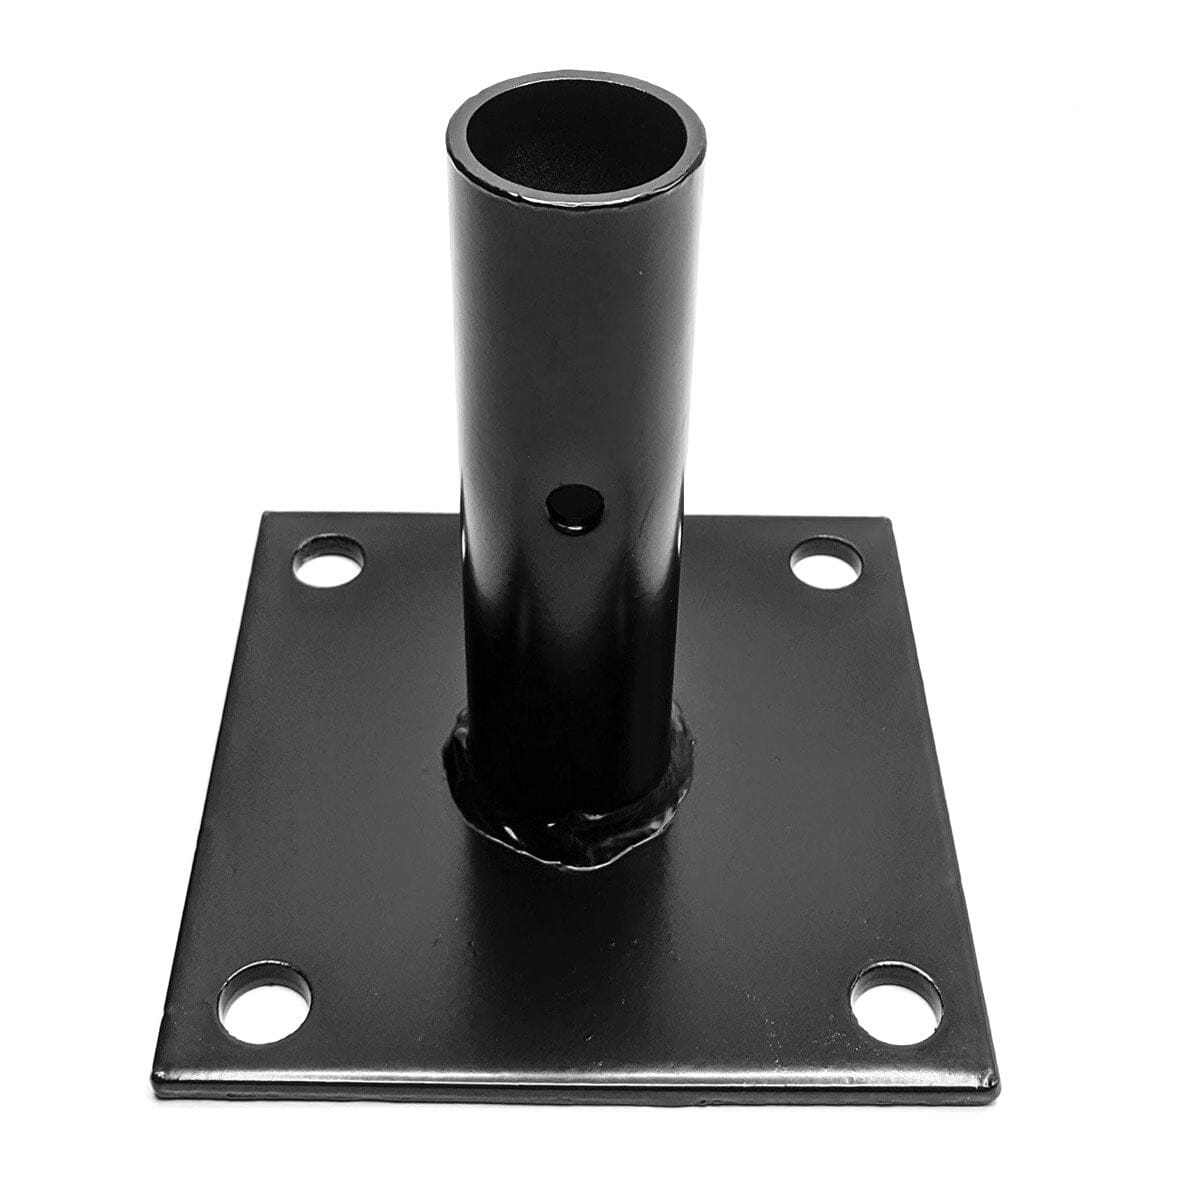 Image displaying the heavy-duty foot pad variant by Dog Proofer for fence post anchoring.